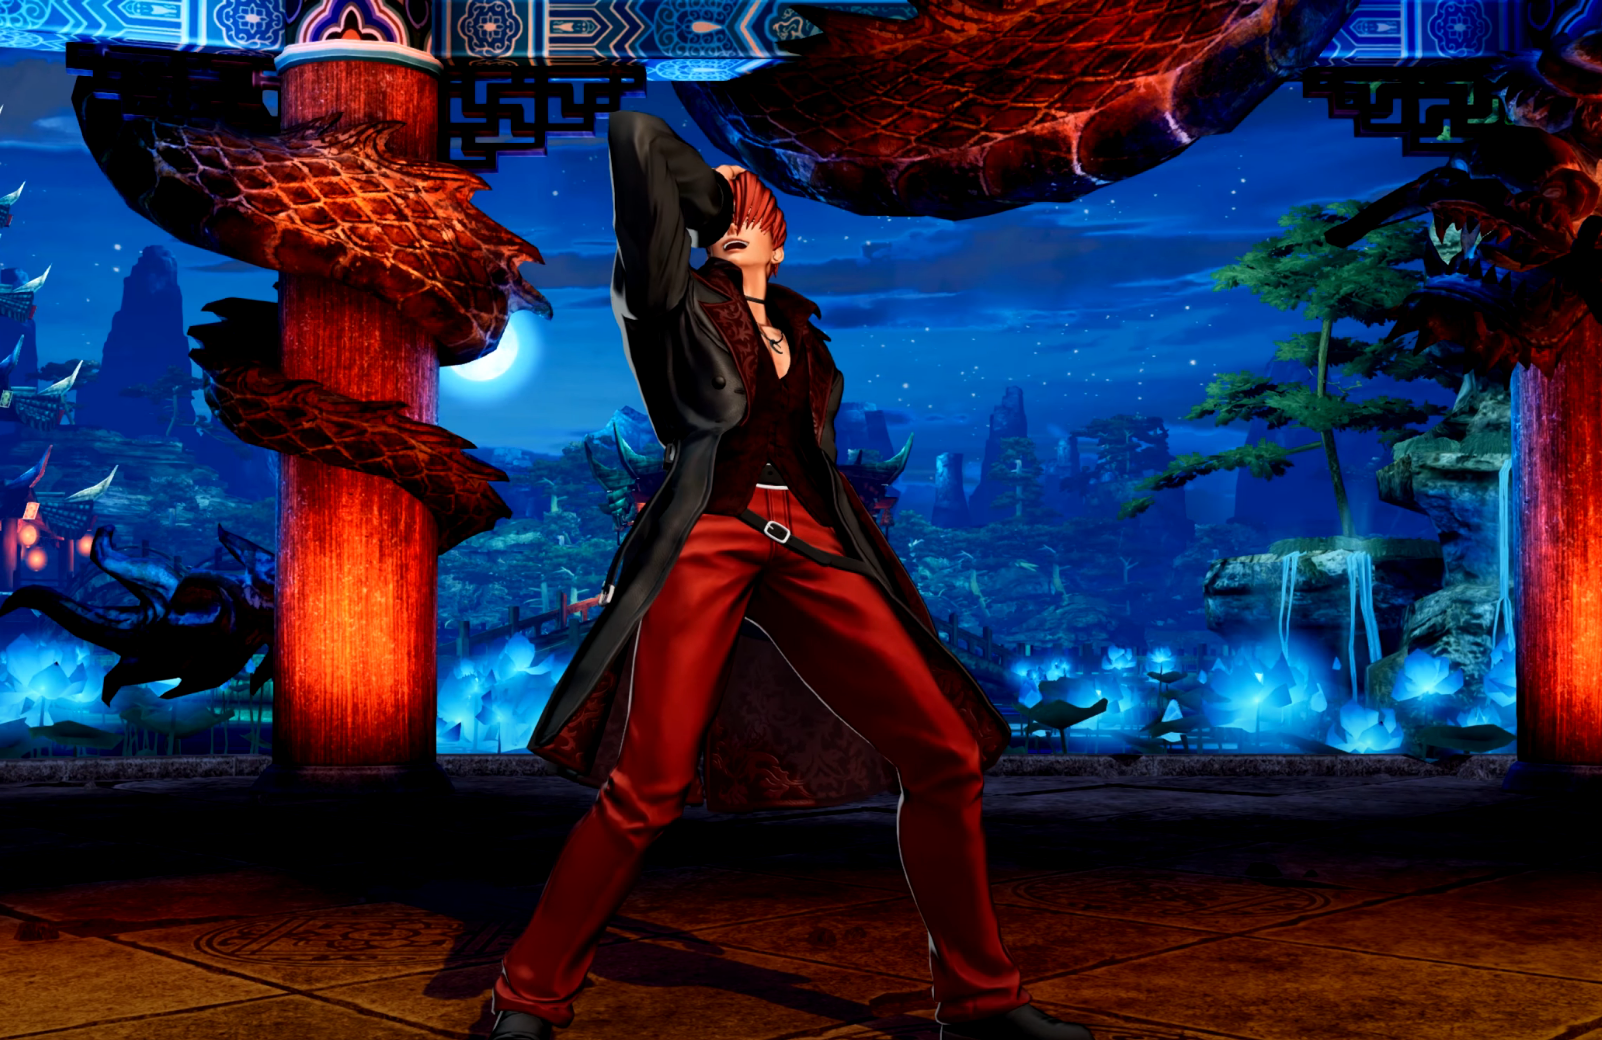 Image for Iori Yagami revealed for King of Fighters 15 with new gameplay trailer